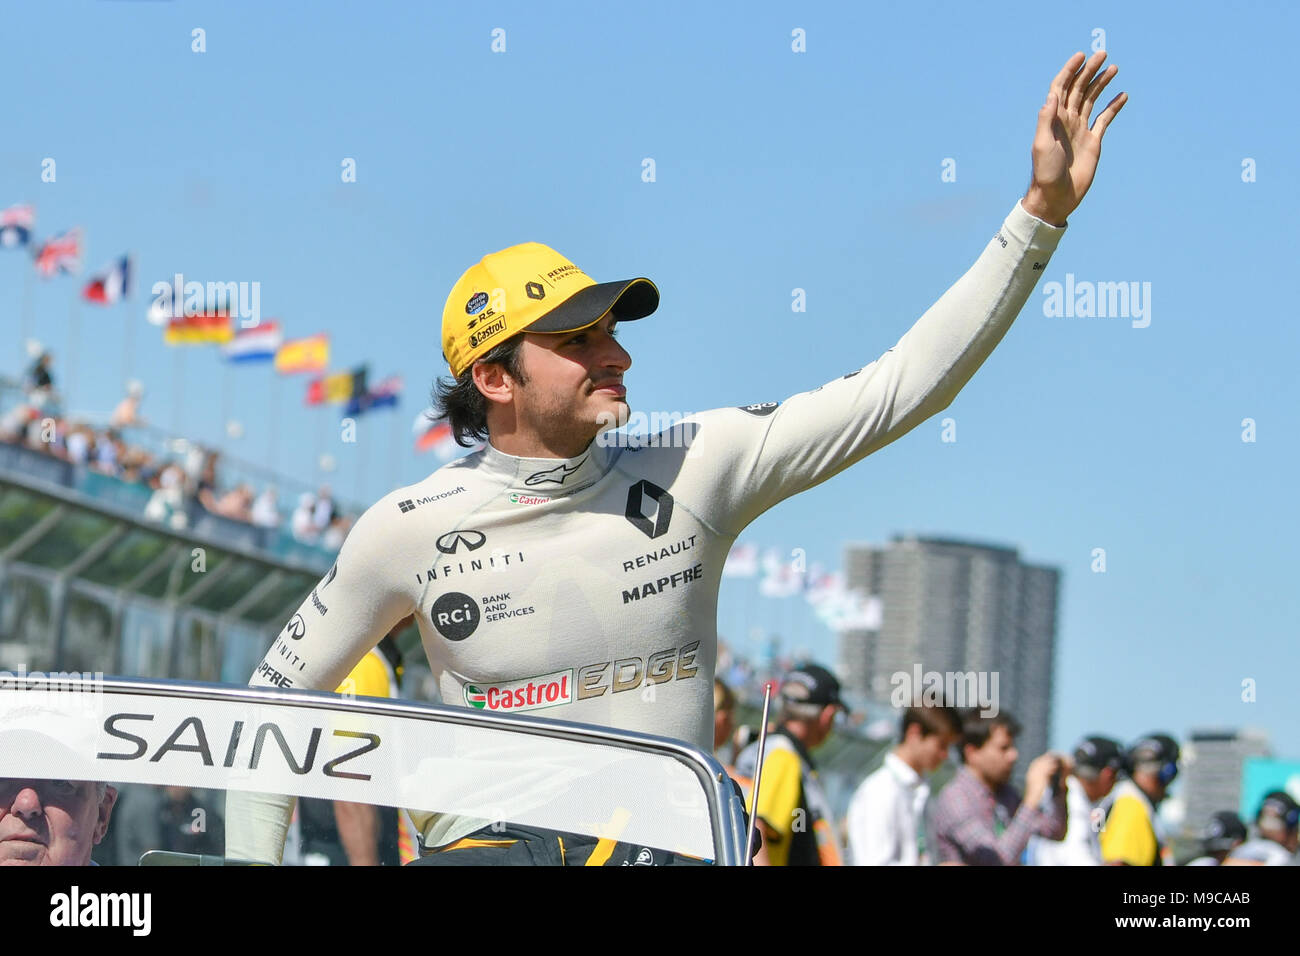 Albert Park, Melbourne, Australia. 25th Mar, 2018. Carlos Sainz Jnr (ESP) #55 from the Renault Sport F1 team waves to the crowd during the drivers' parade at the 2018 Australian Formula One Grand Prix at Albert Park, Melbourne, Australia. Sydney Low/Cal Sport Media/Alamy Live News Stock Photo